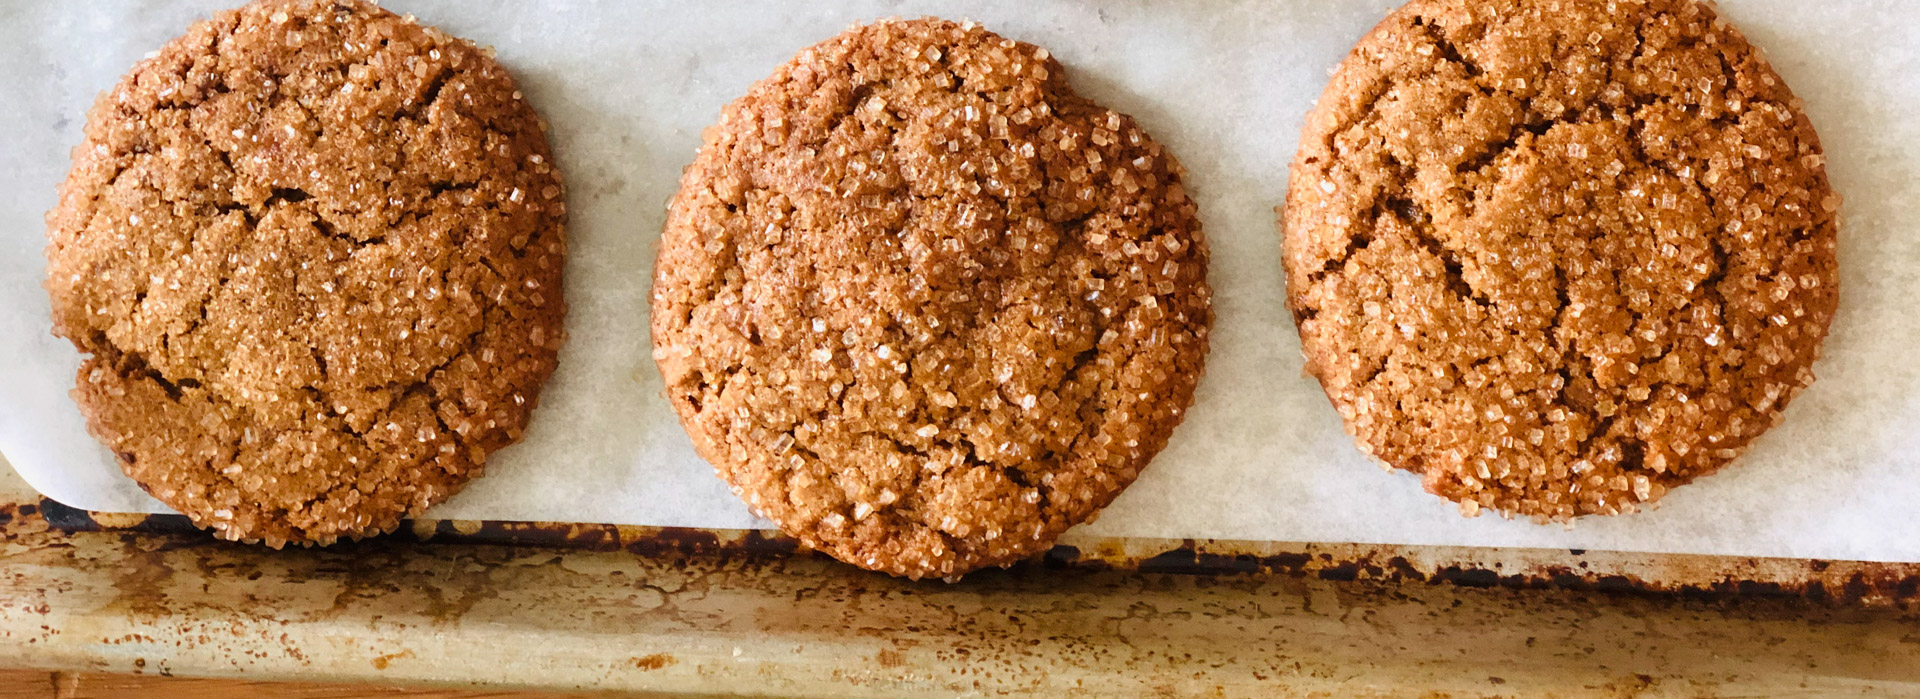 These chewy vegan ginger crinkle cookies are rich, even without butter, eggs, or molasses. Instead, prune puree binds together the ingredients  and adds sweetness with less added sugar.